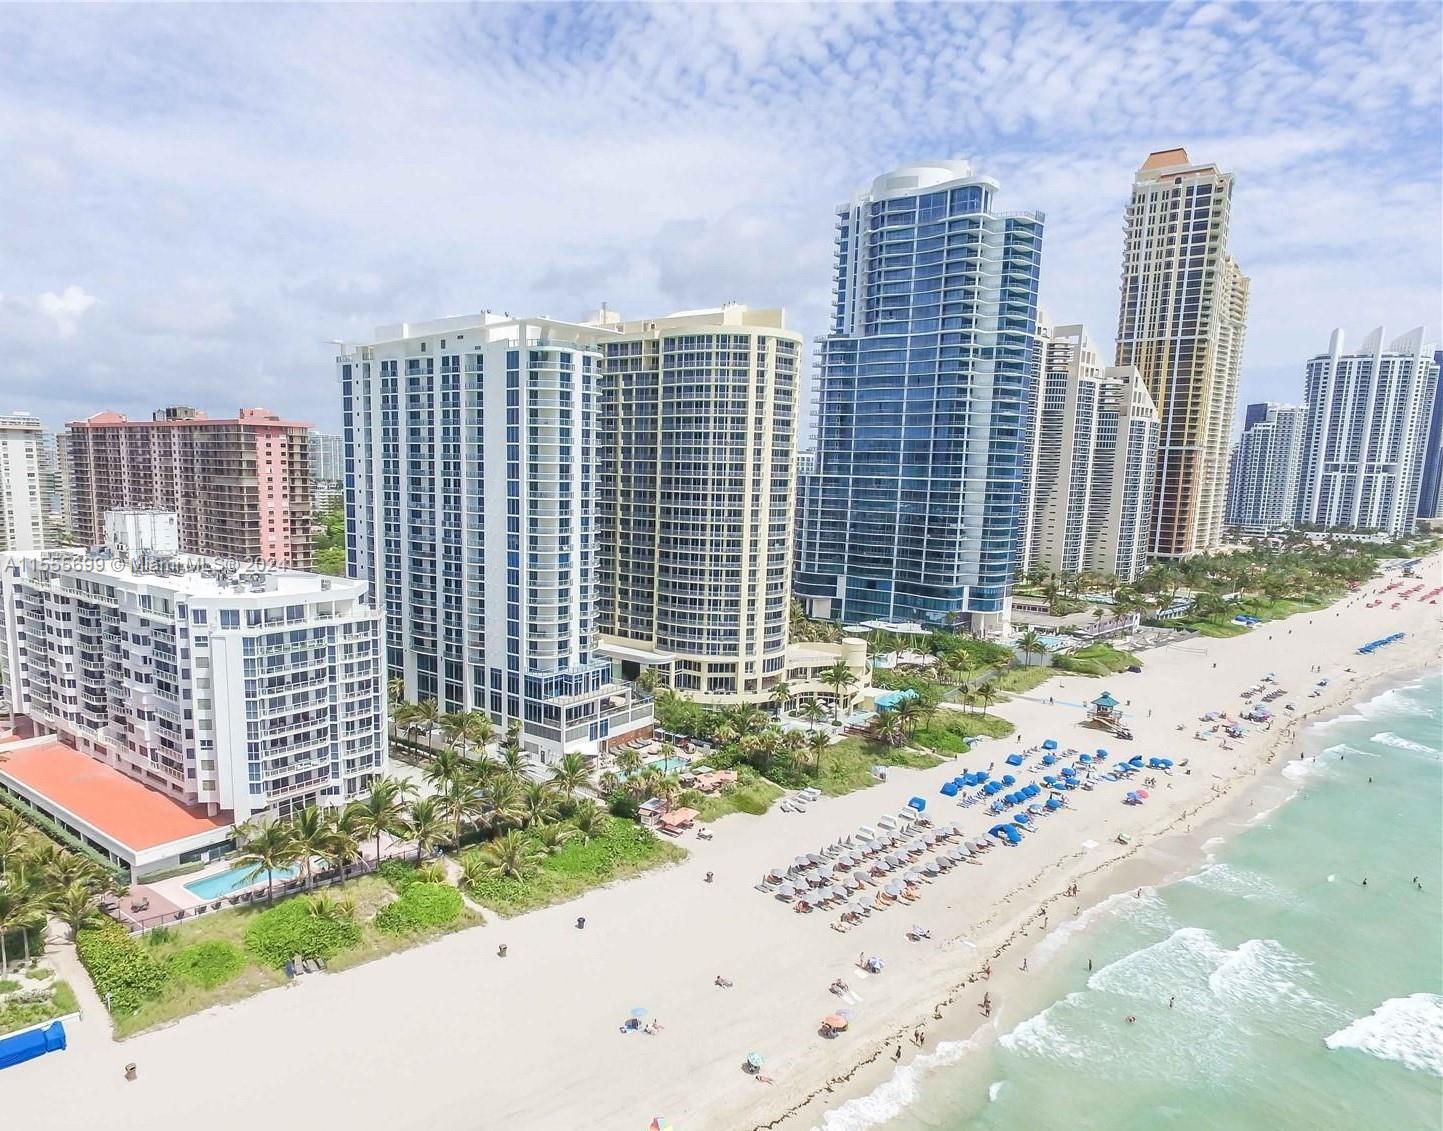 Photo of 17275 Collins Ave #603 in Sunny Isles Beach, FL